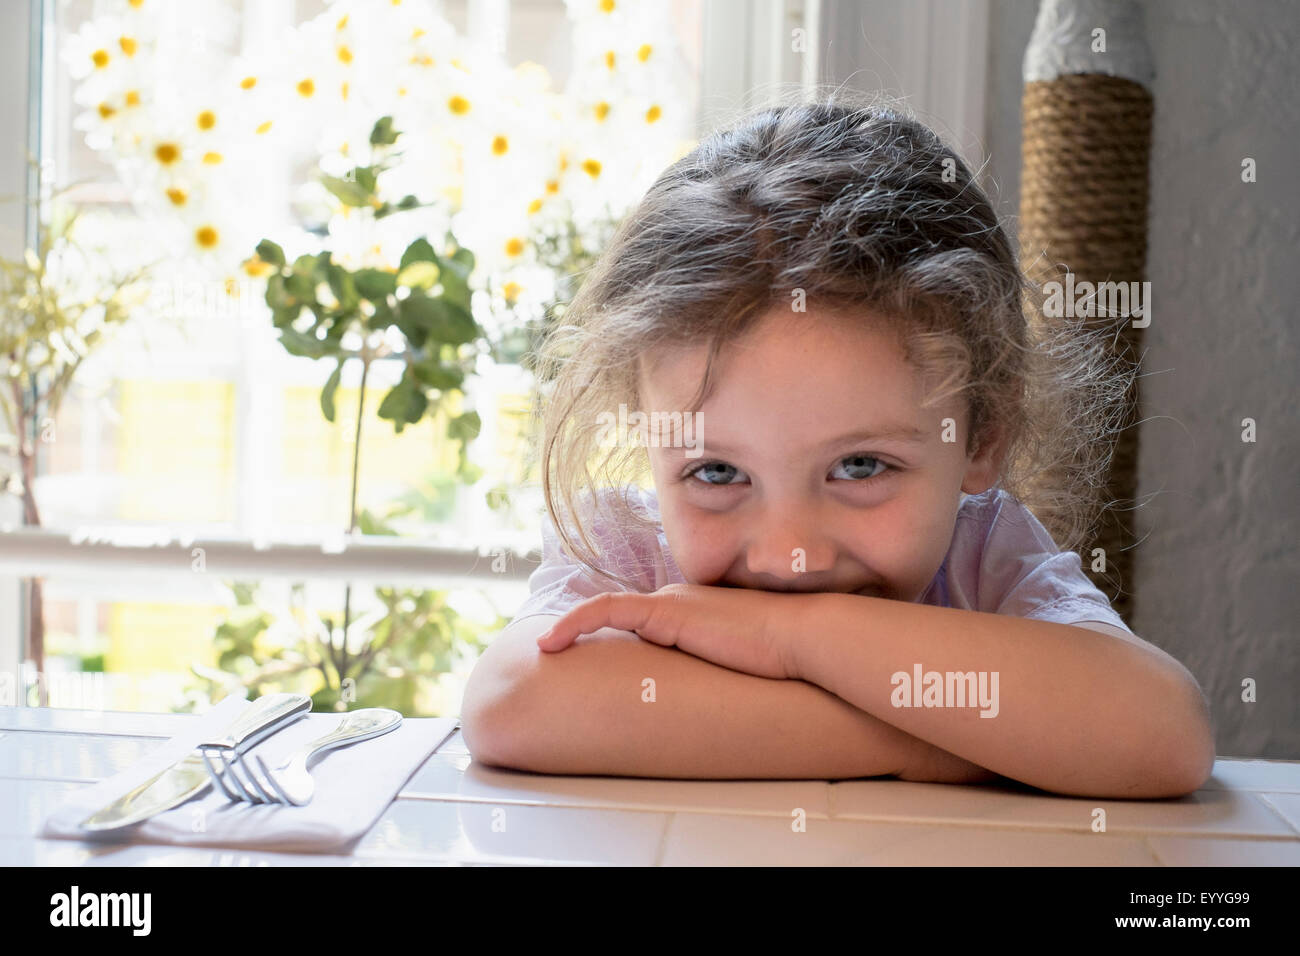 Caucasian girl leaning on kitchen table Stock Photo